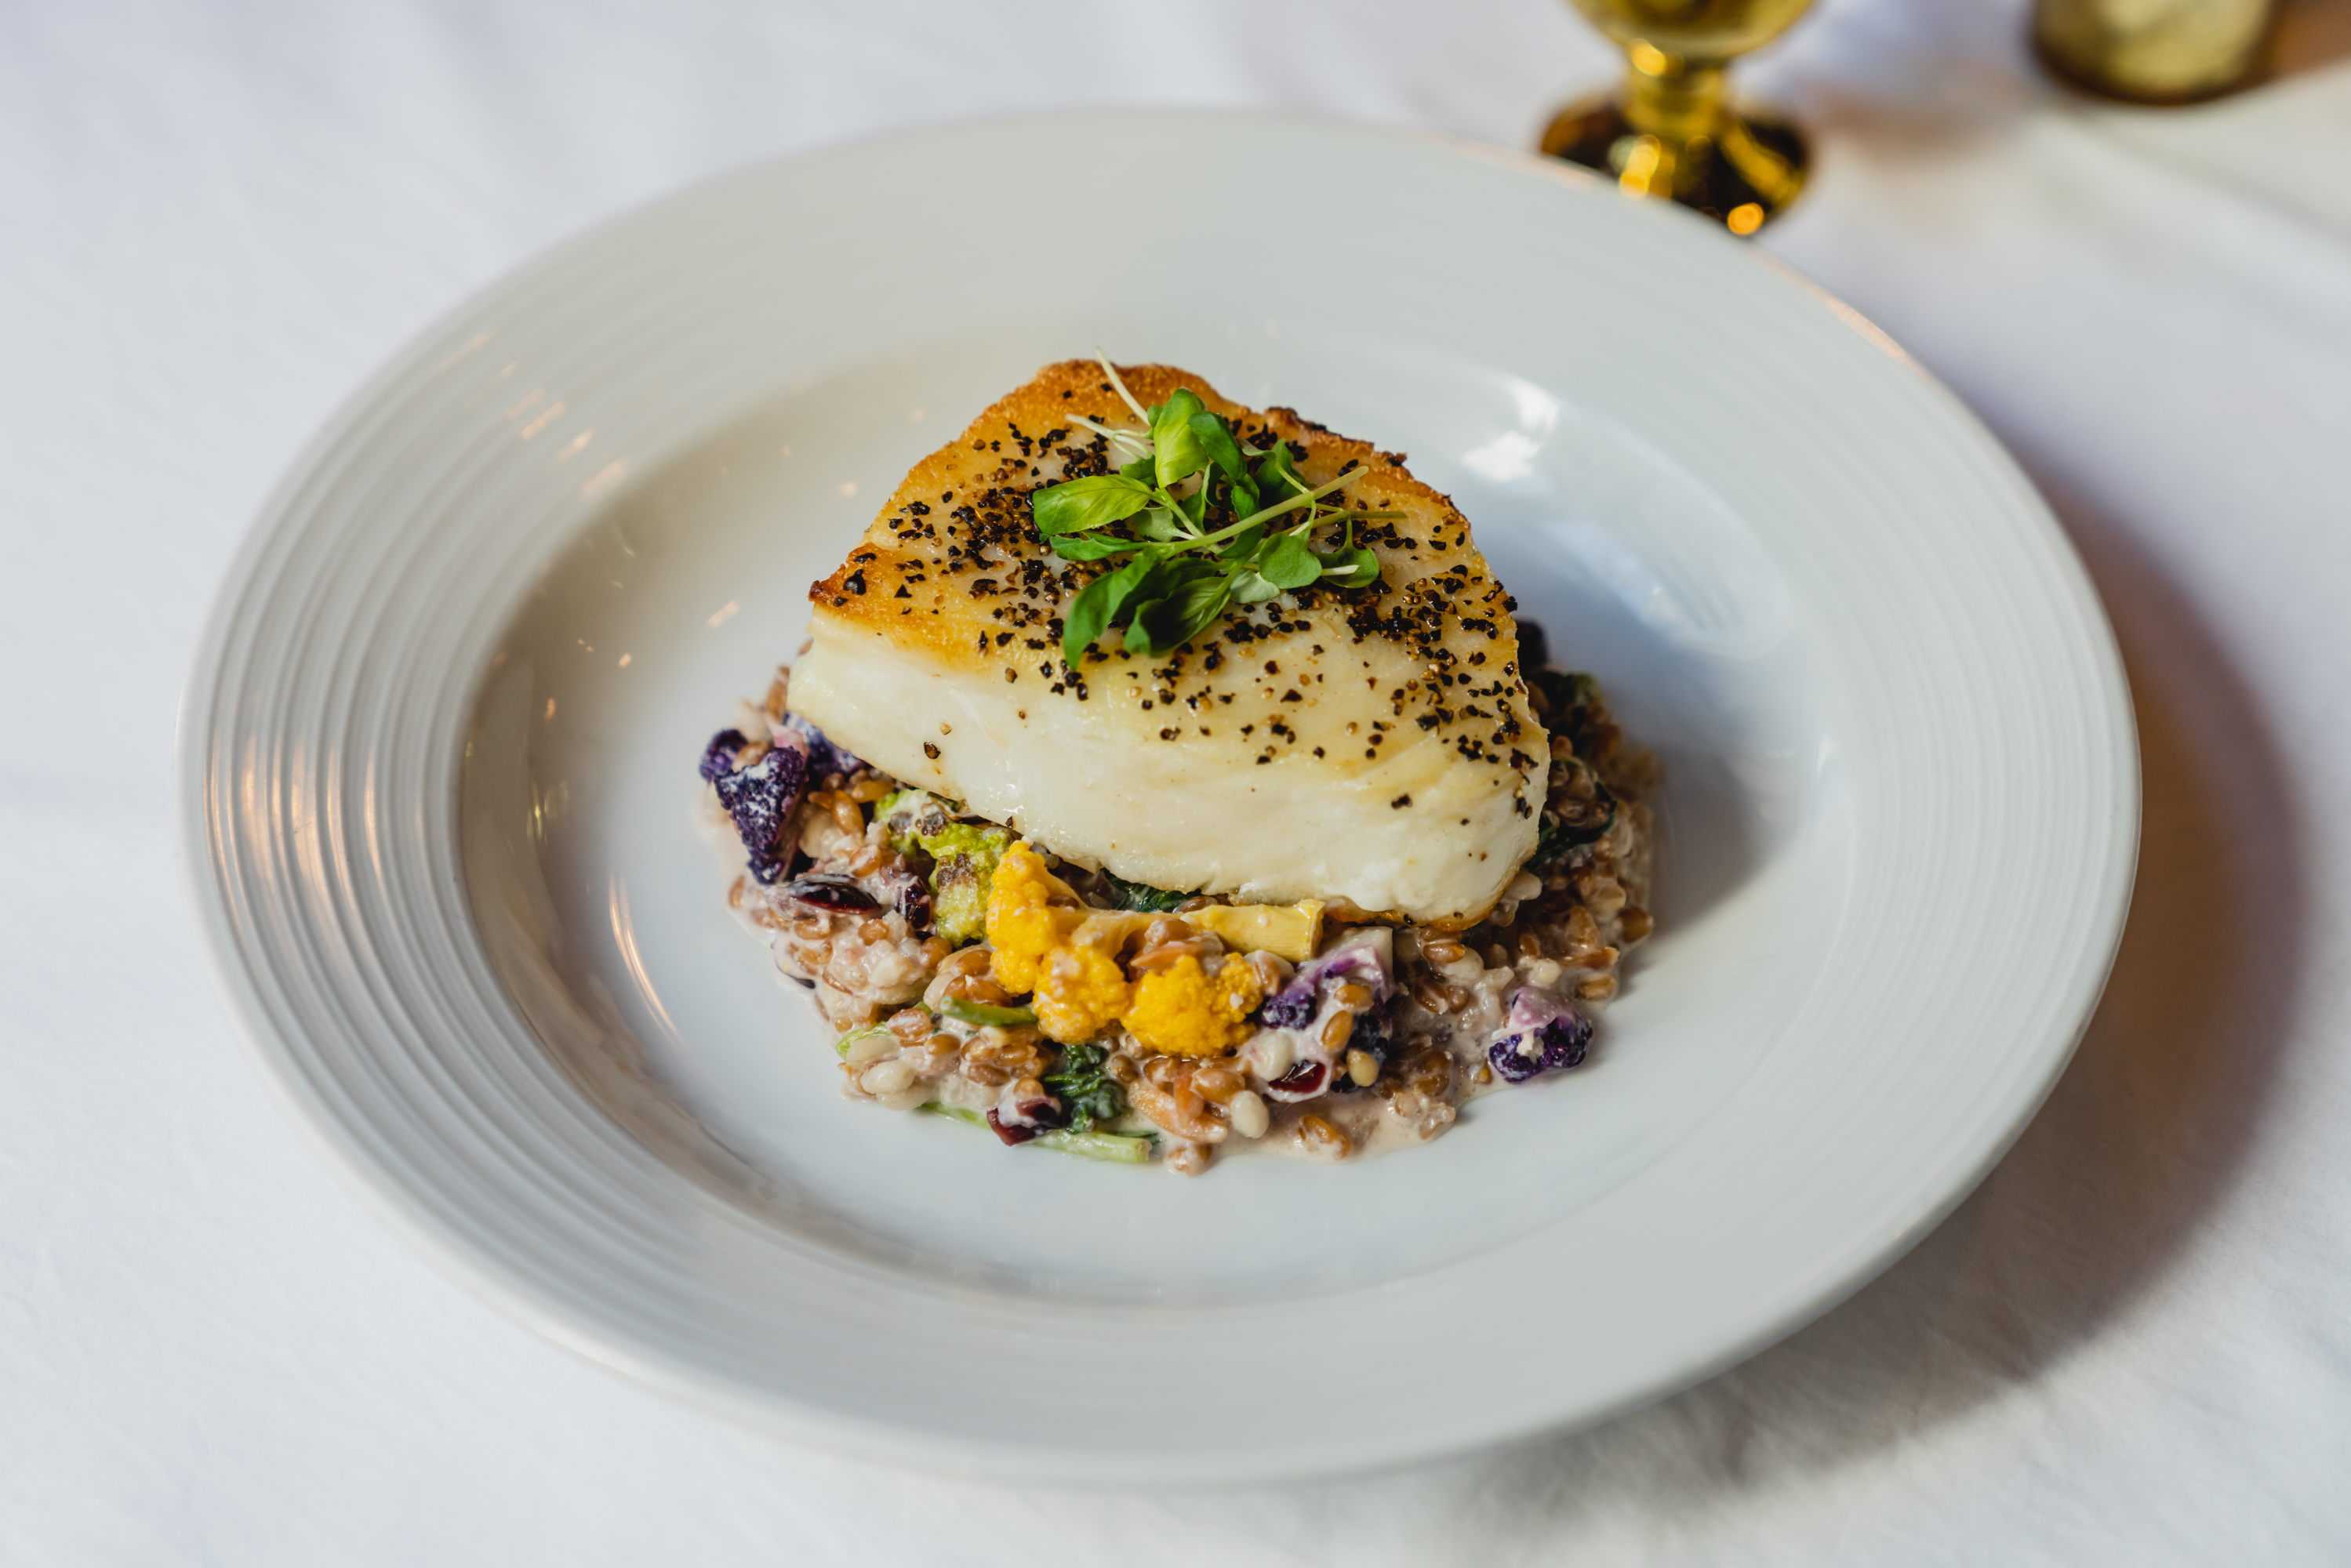 A plate of a seared white fish fillet on top of grains. 